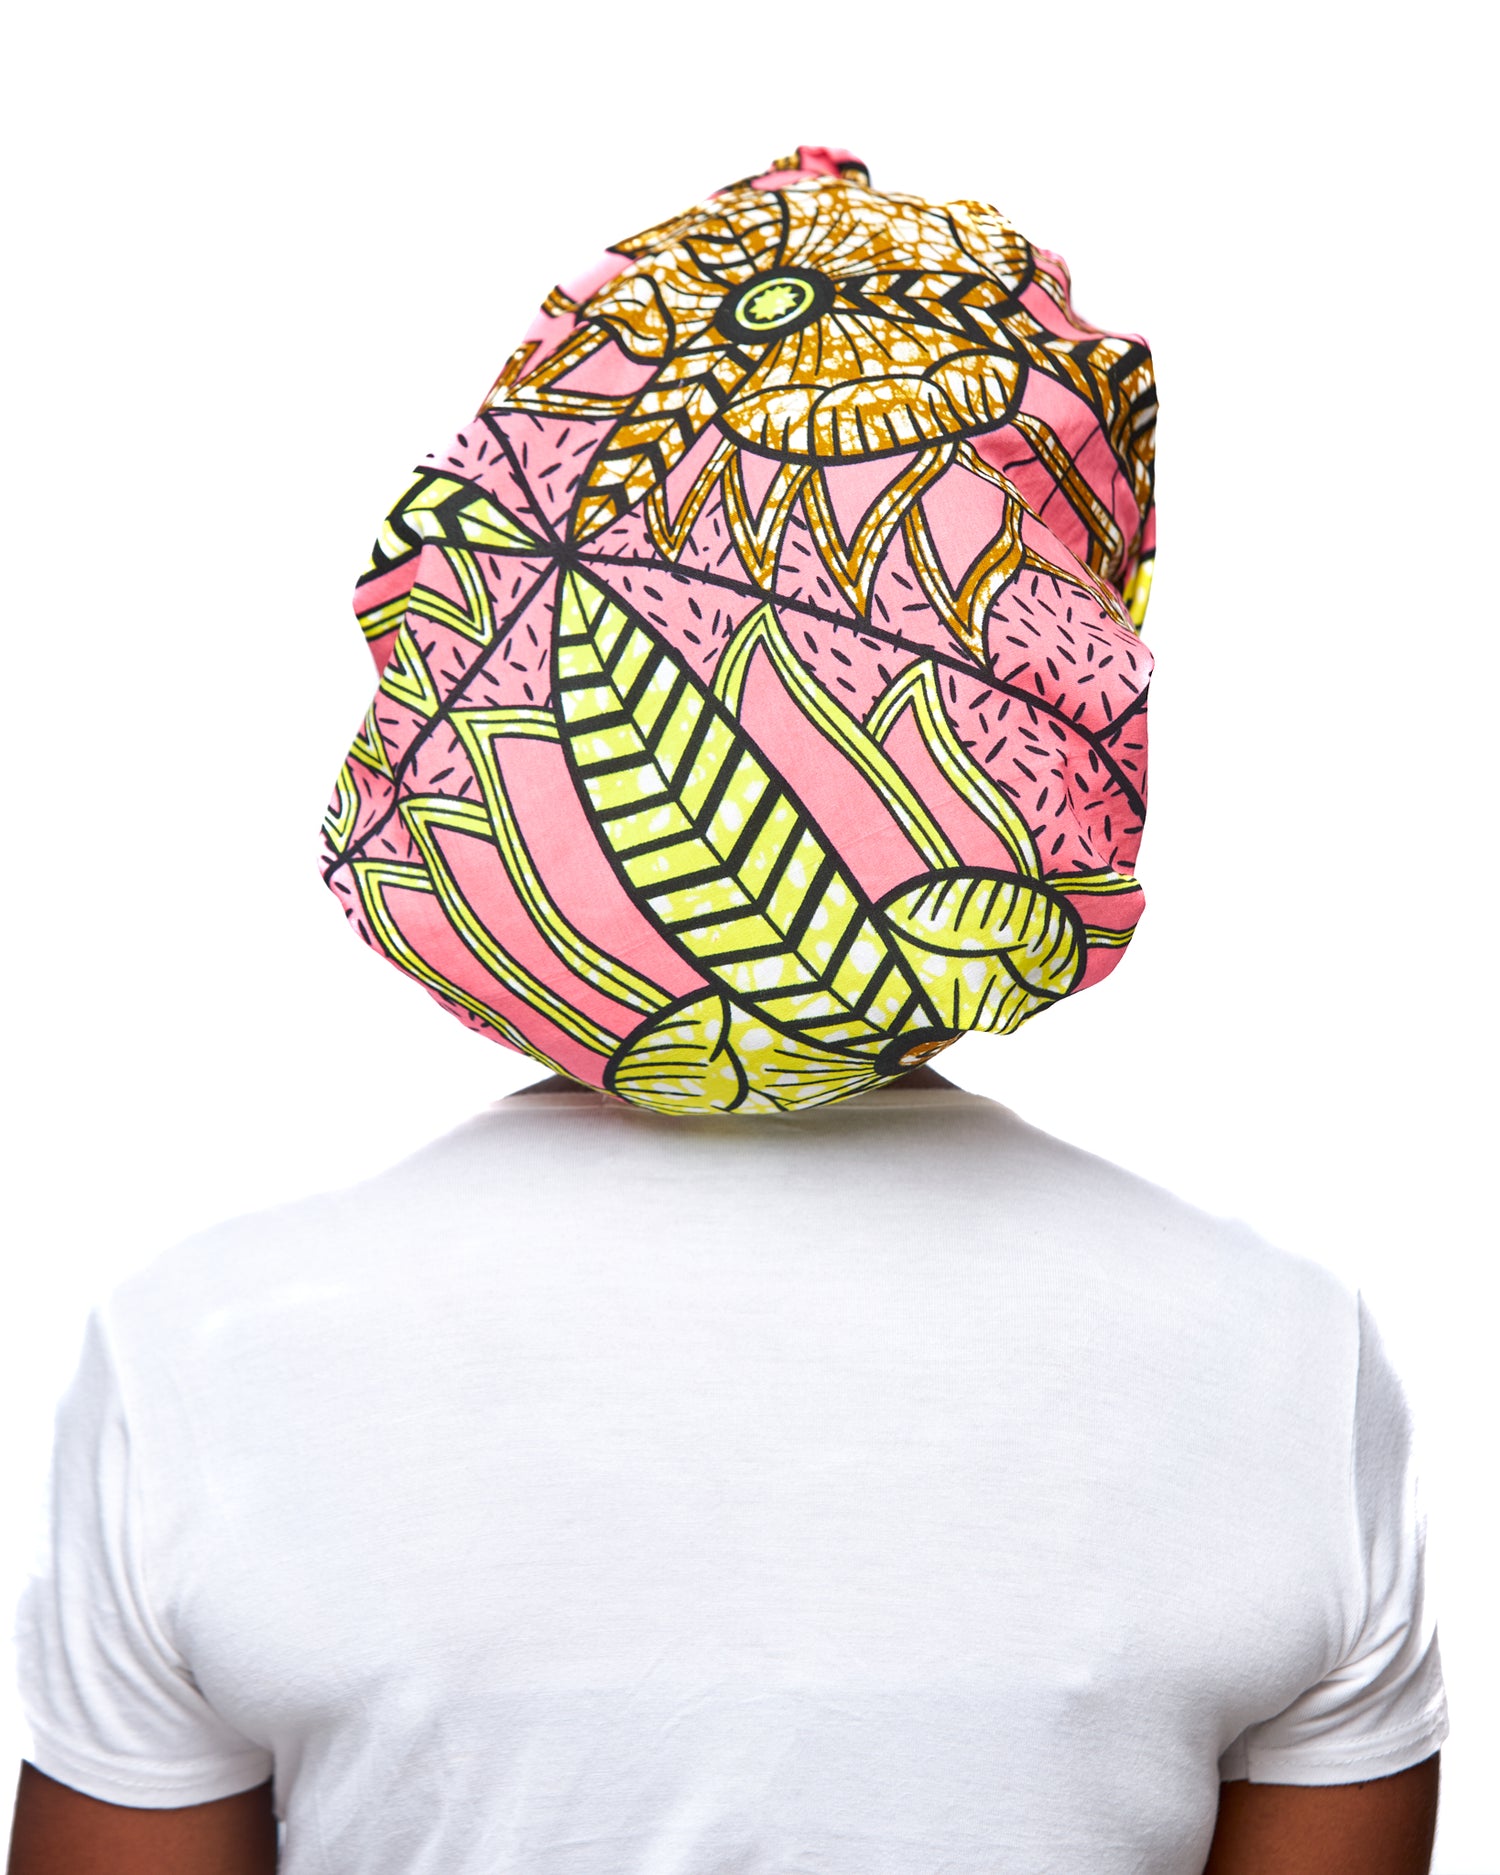 Print Made of Pink, yellow, Black and Curry Blended Beautiful Colours, Hand Made Elastic Silklined Bonnet With Band